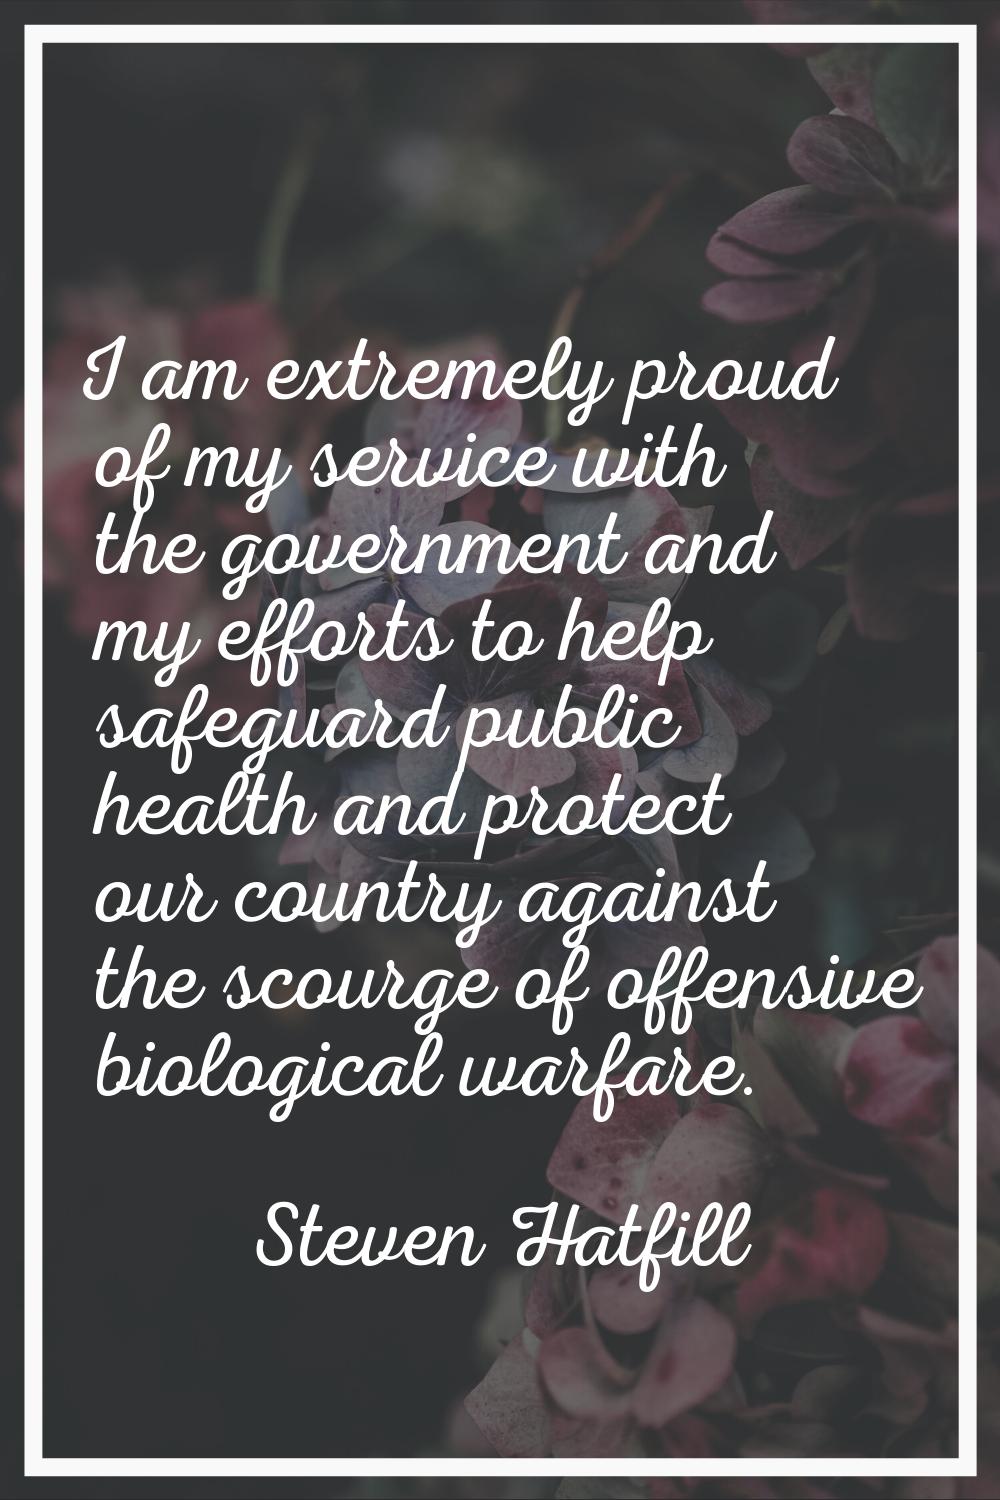 I am extremely proud of my service with the government and my efforts to help safeguard public heal